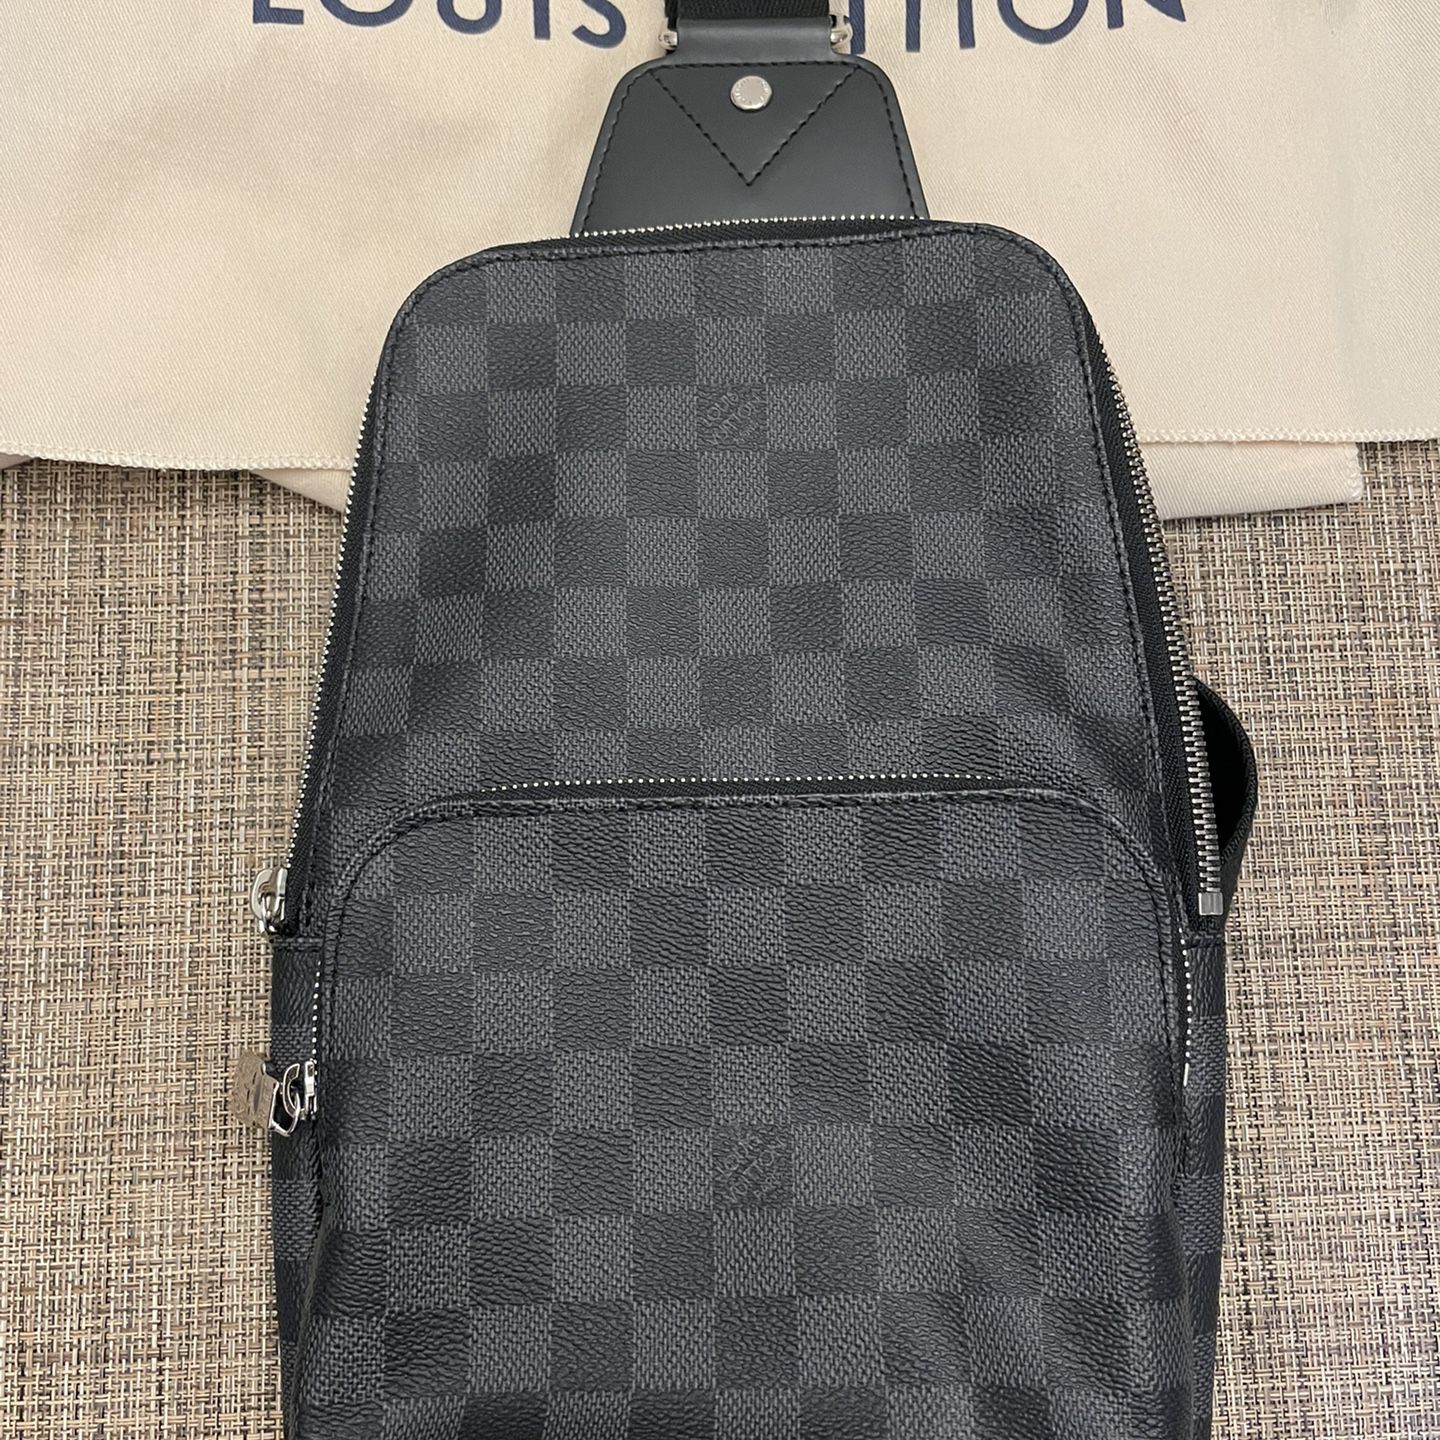 Louis Vuitton Avenue Slingbag In Damier Graphite - clothing & accessories -  by owner - apparel sale - craigslist